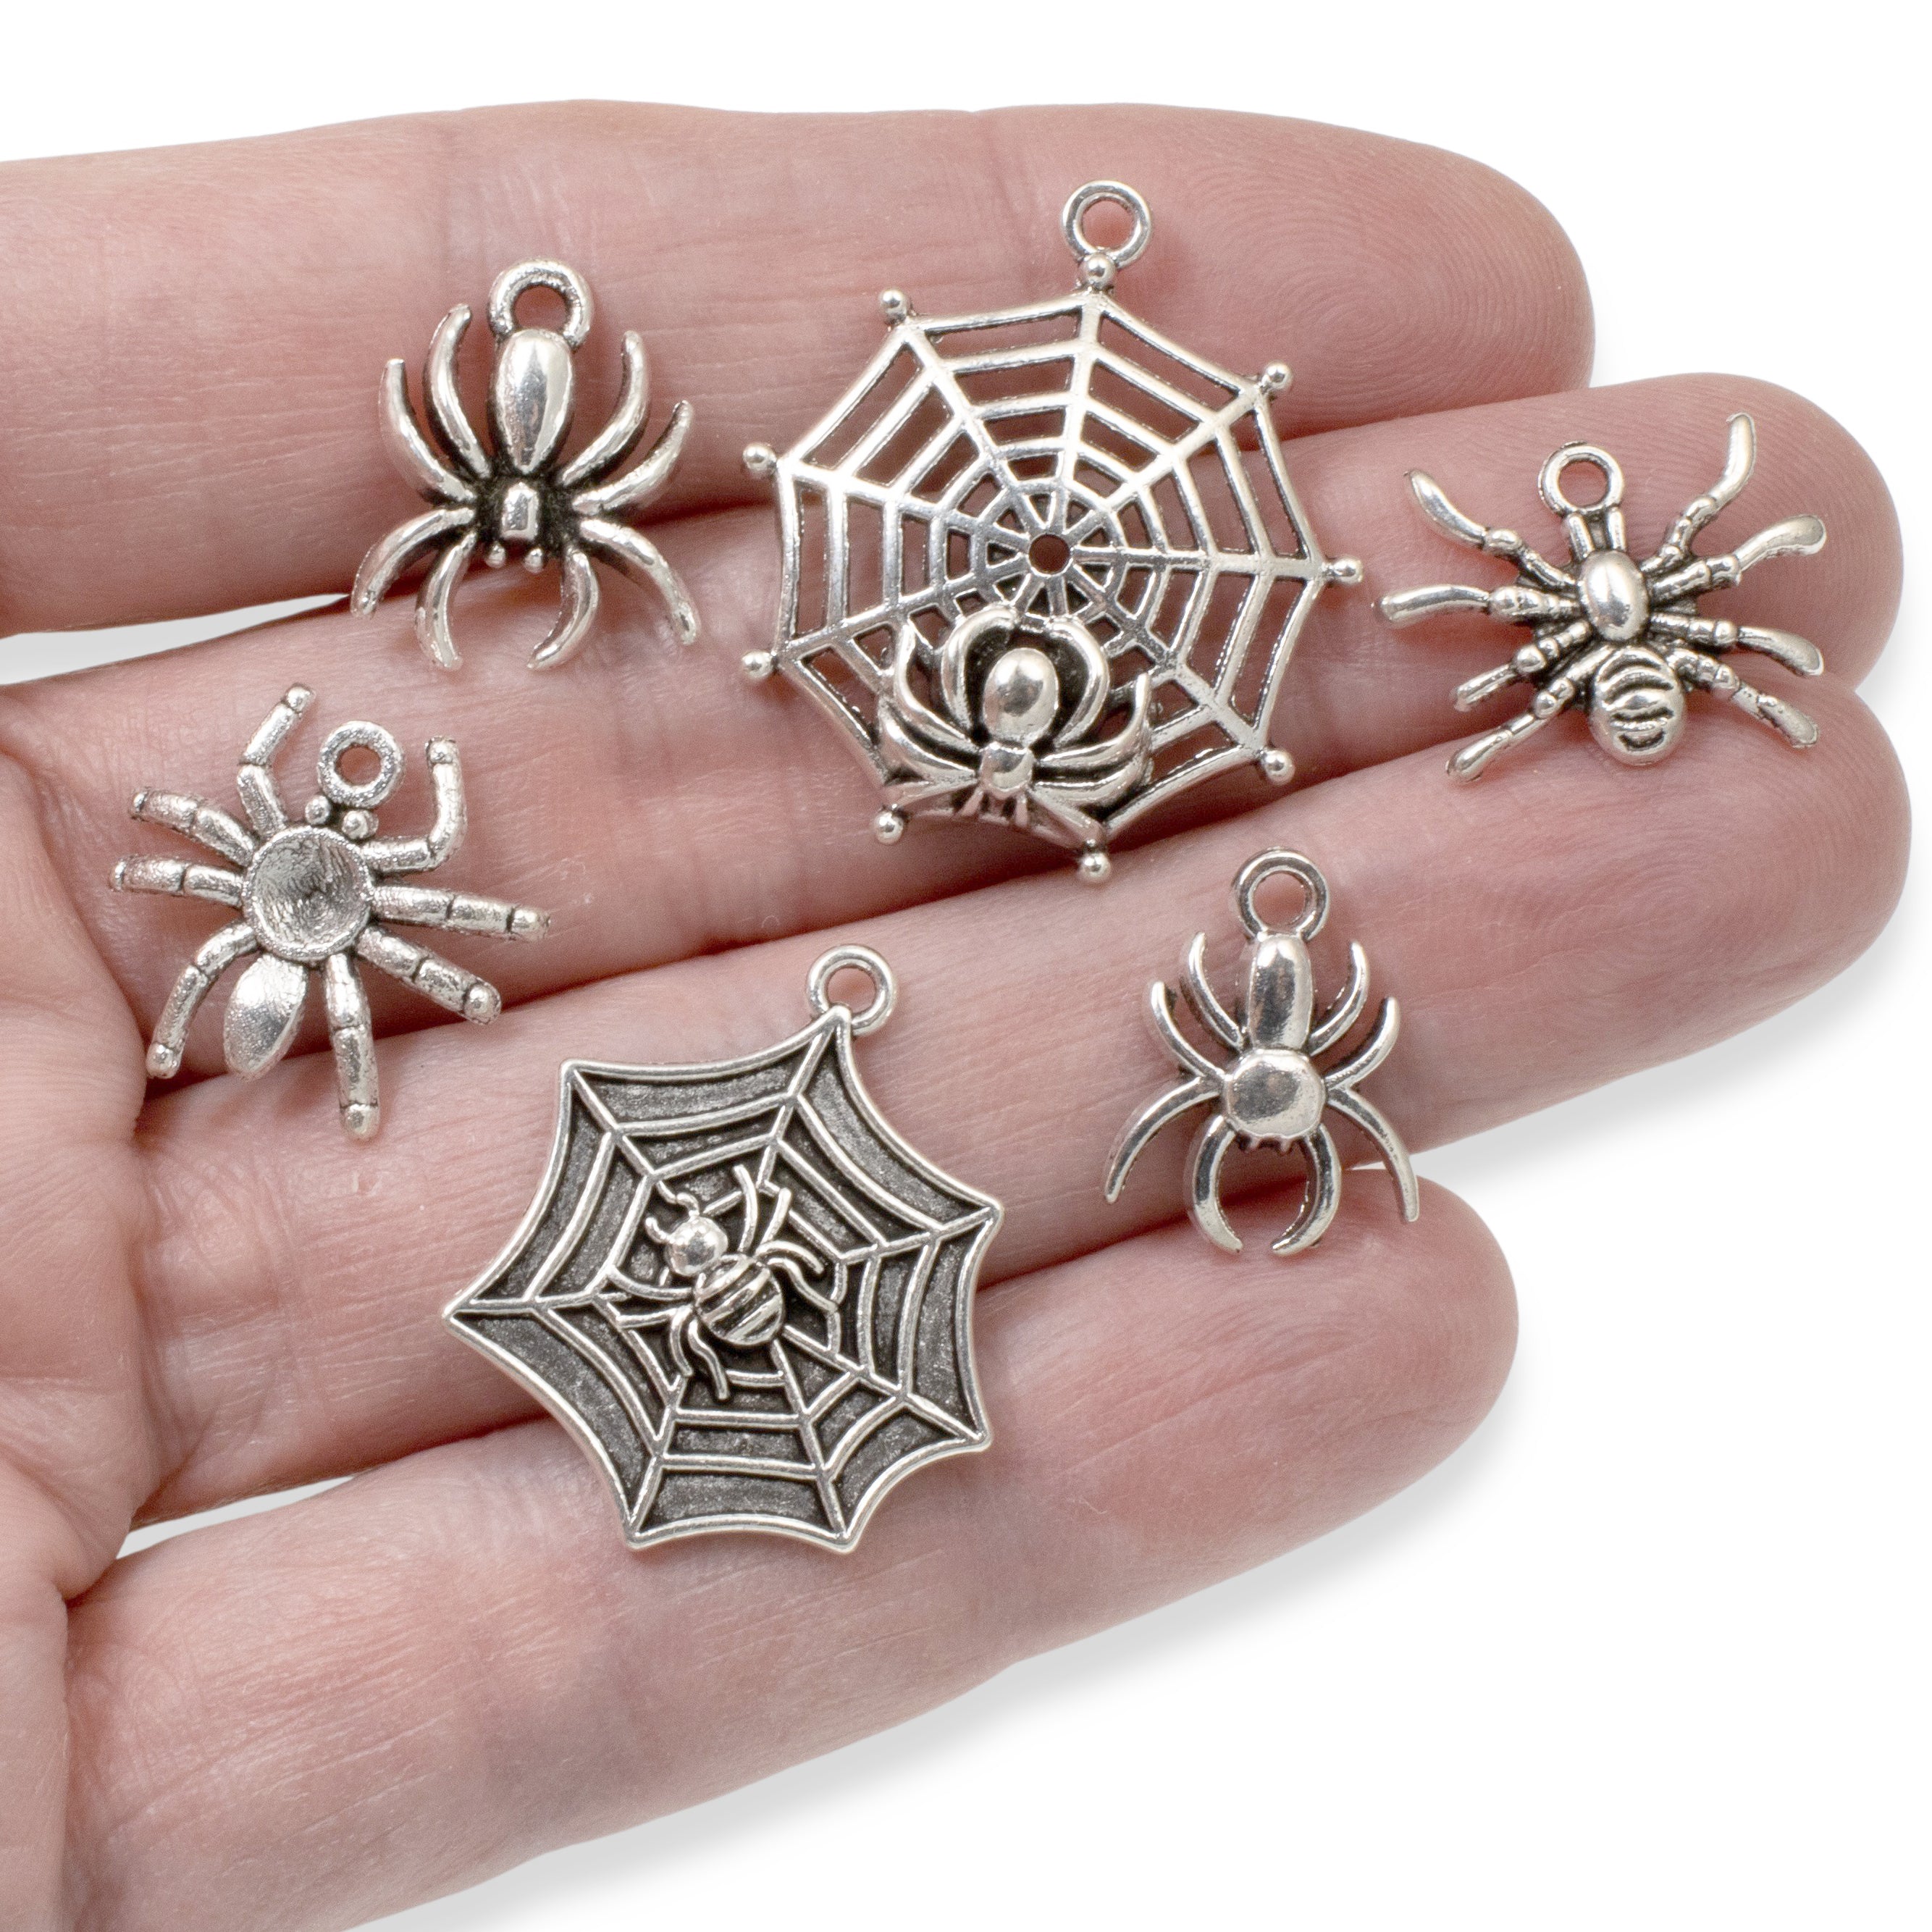 AVBeads Clip-On Charms Spider Charm Antique Silver Metal Pagan Charm Clip